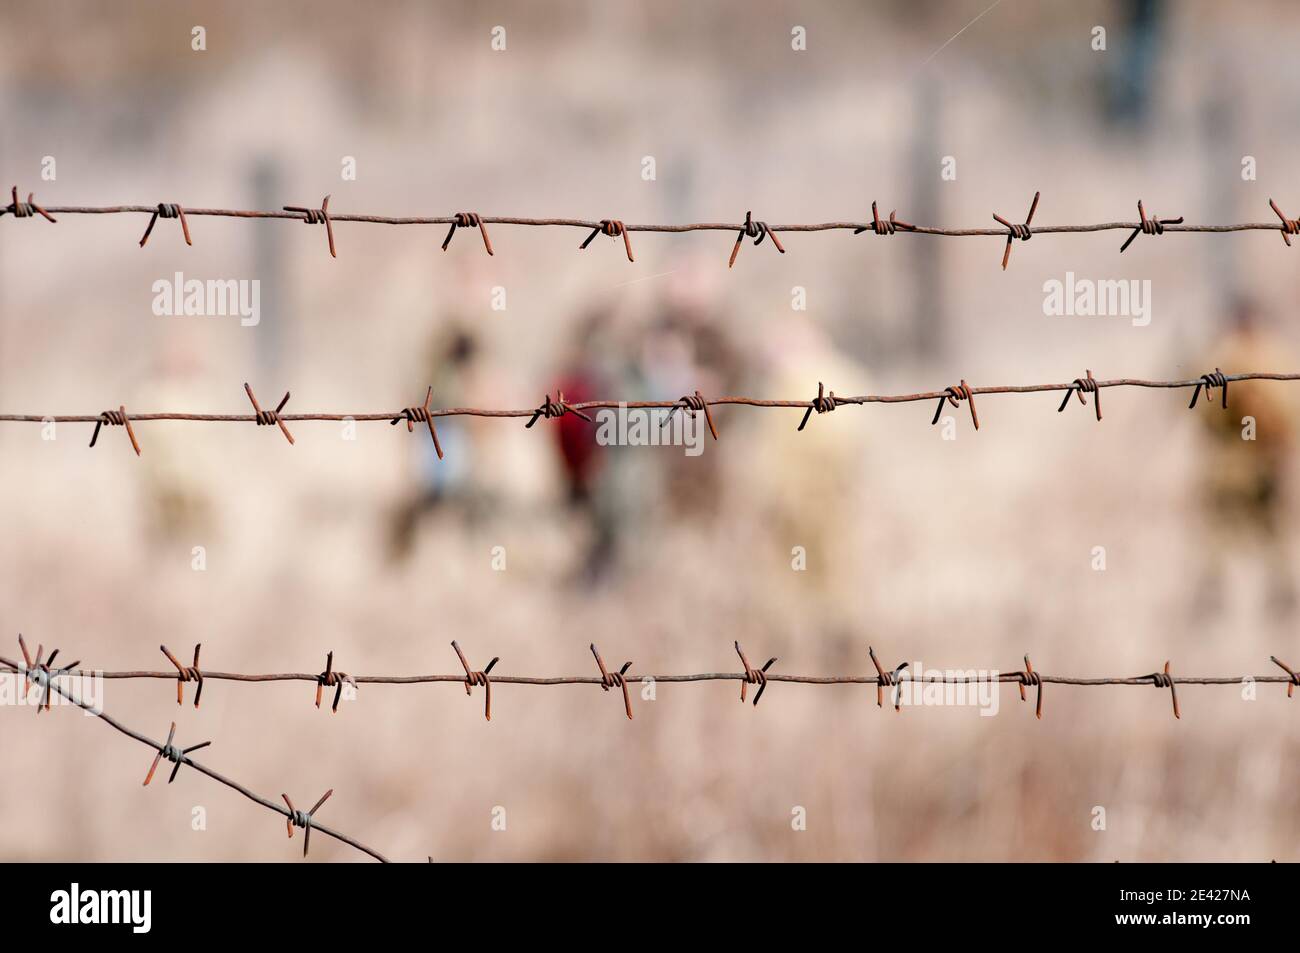 Old rusty barbed wire on the fence and blurred figures of people Stock Photo